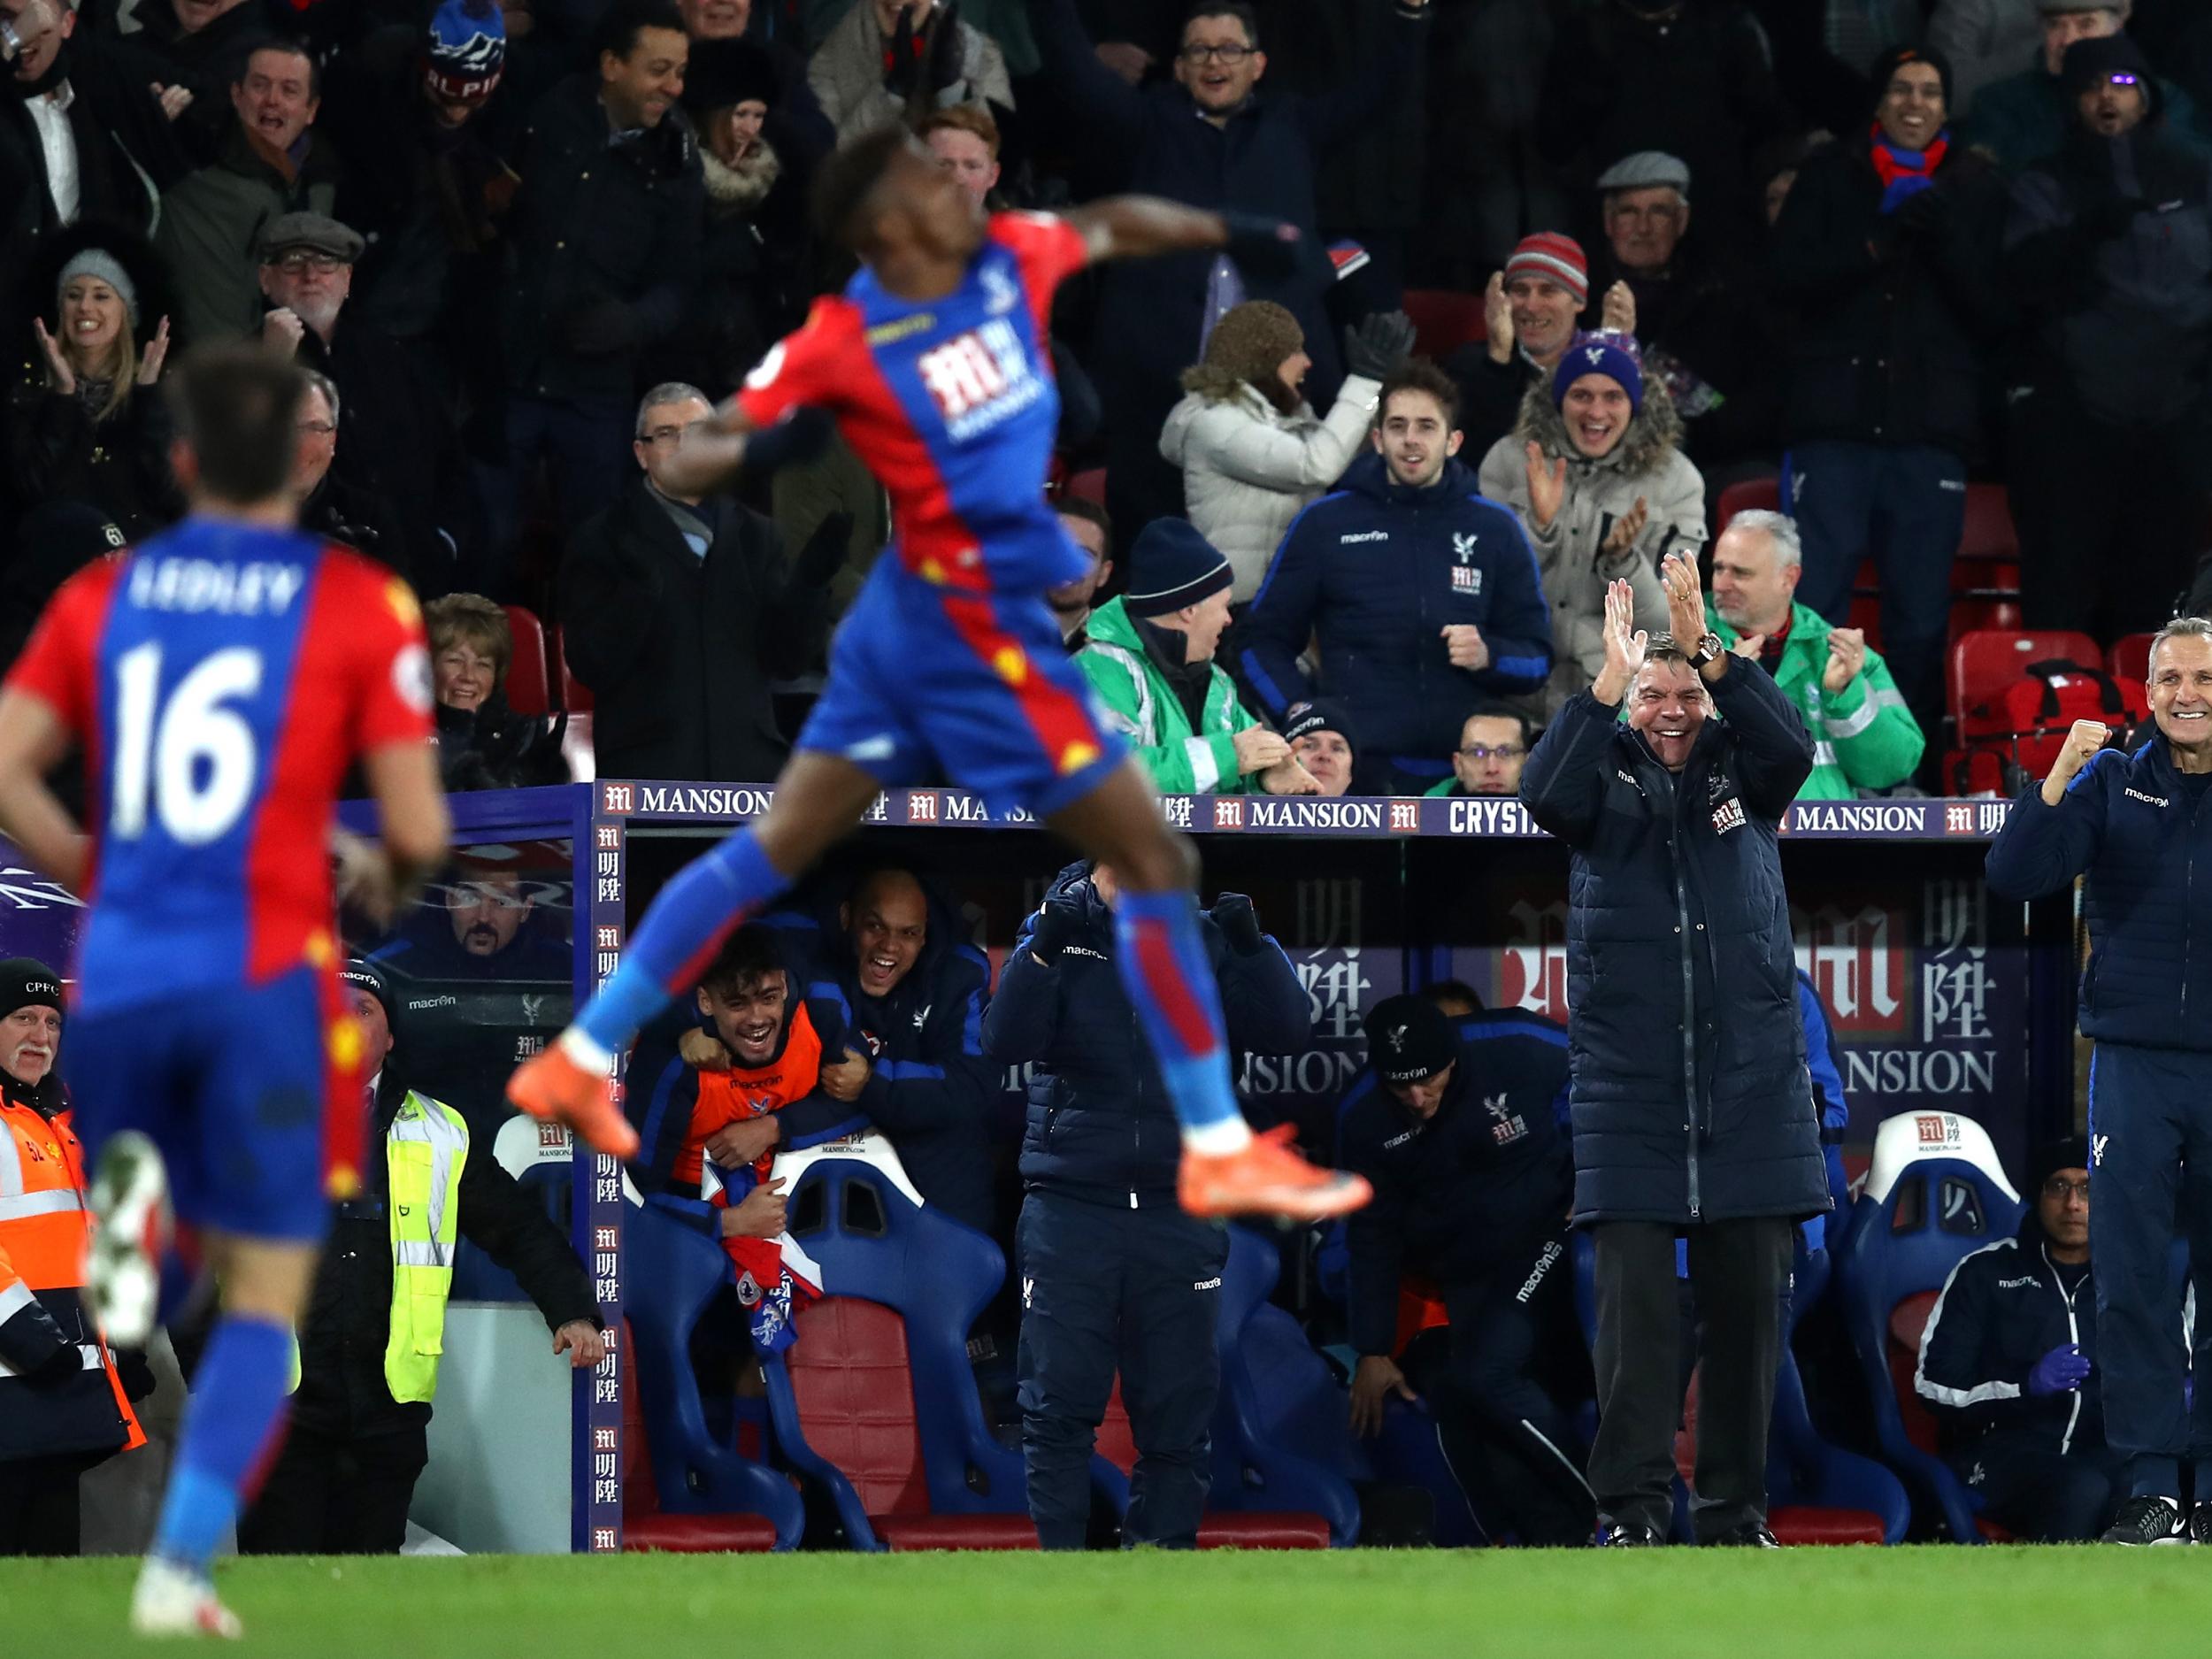 Zaha celebrated in front of Allardyce after late equaliser